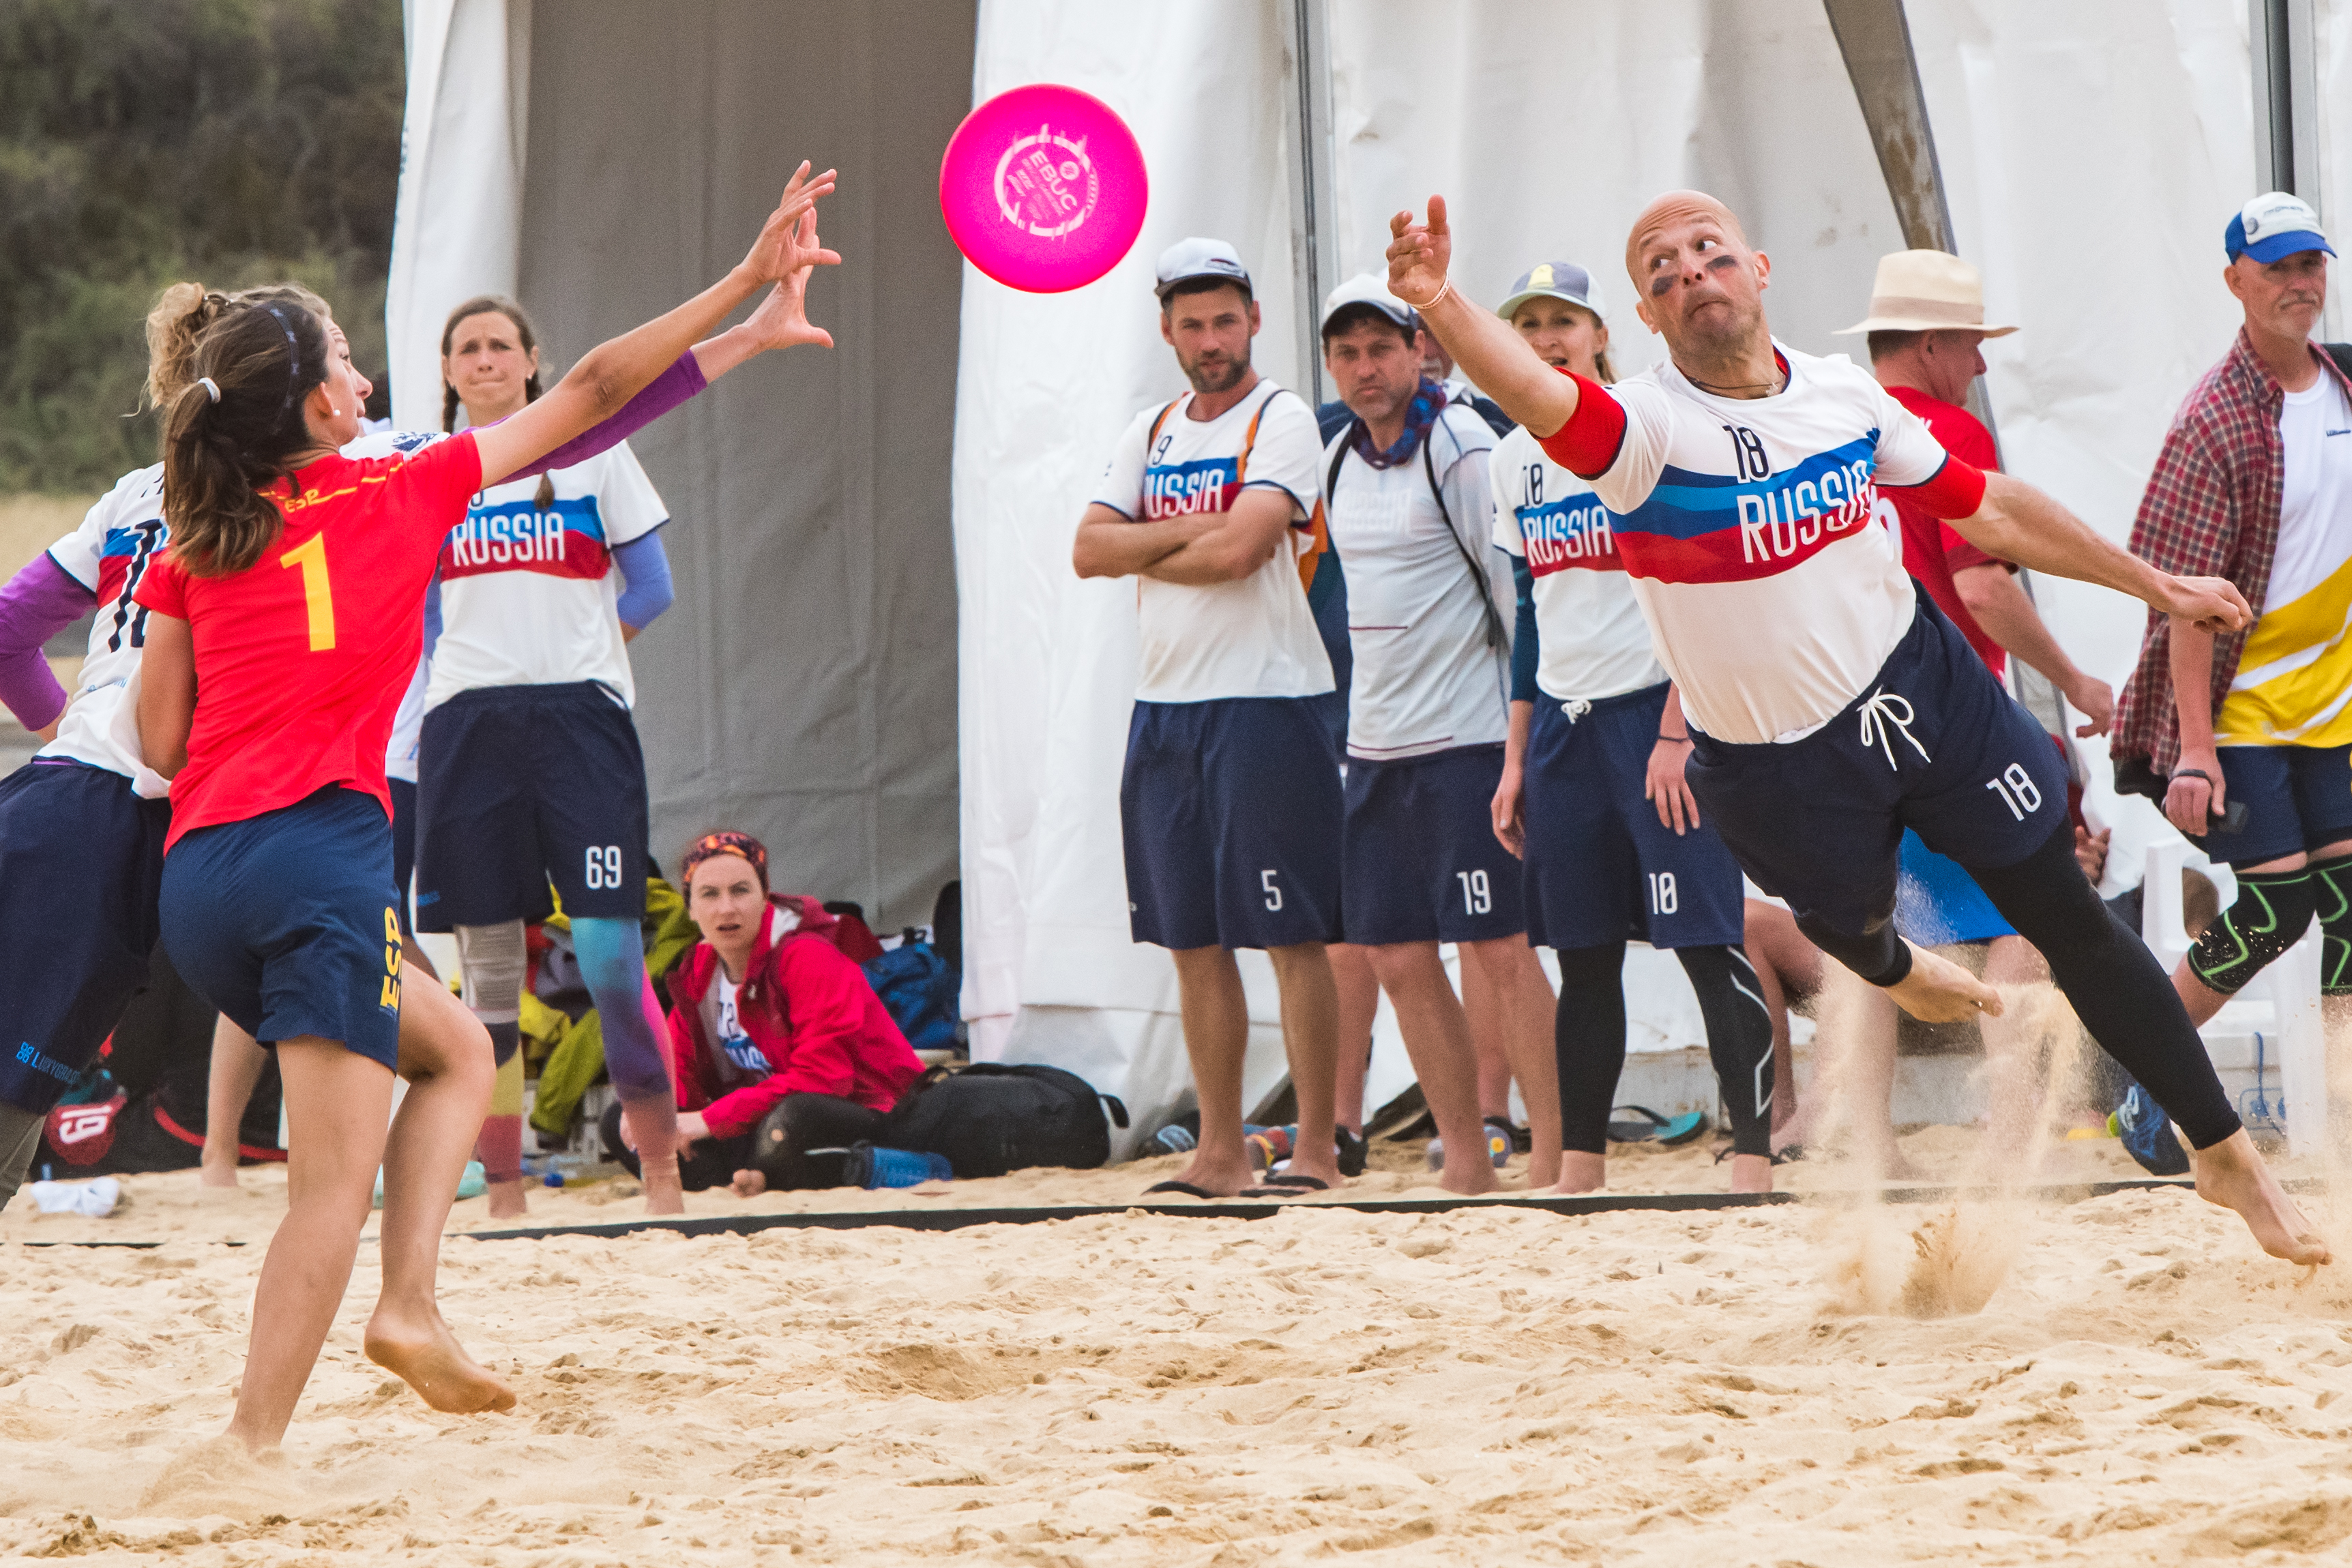 European Beach Ultimate Championships: A short preview of the master's  divisions. - #EBUC2019 - 2019 European Beach Ultimate Championships